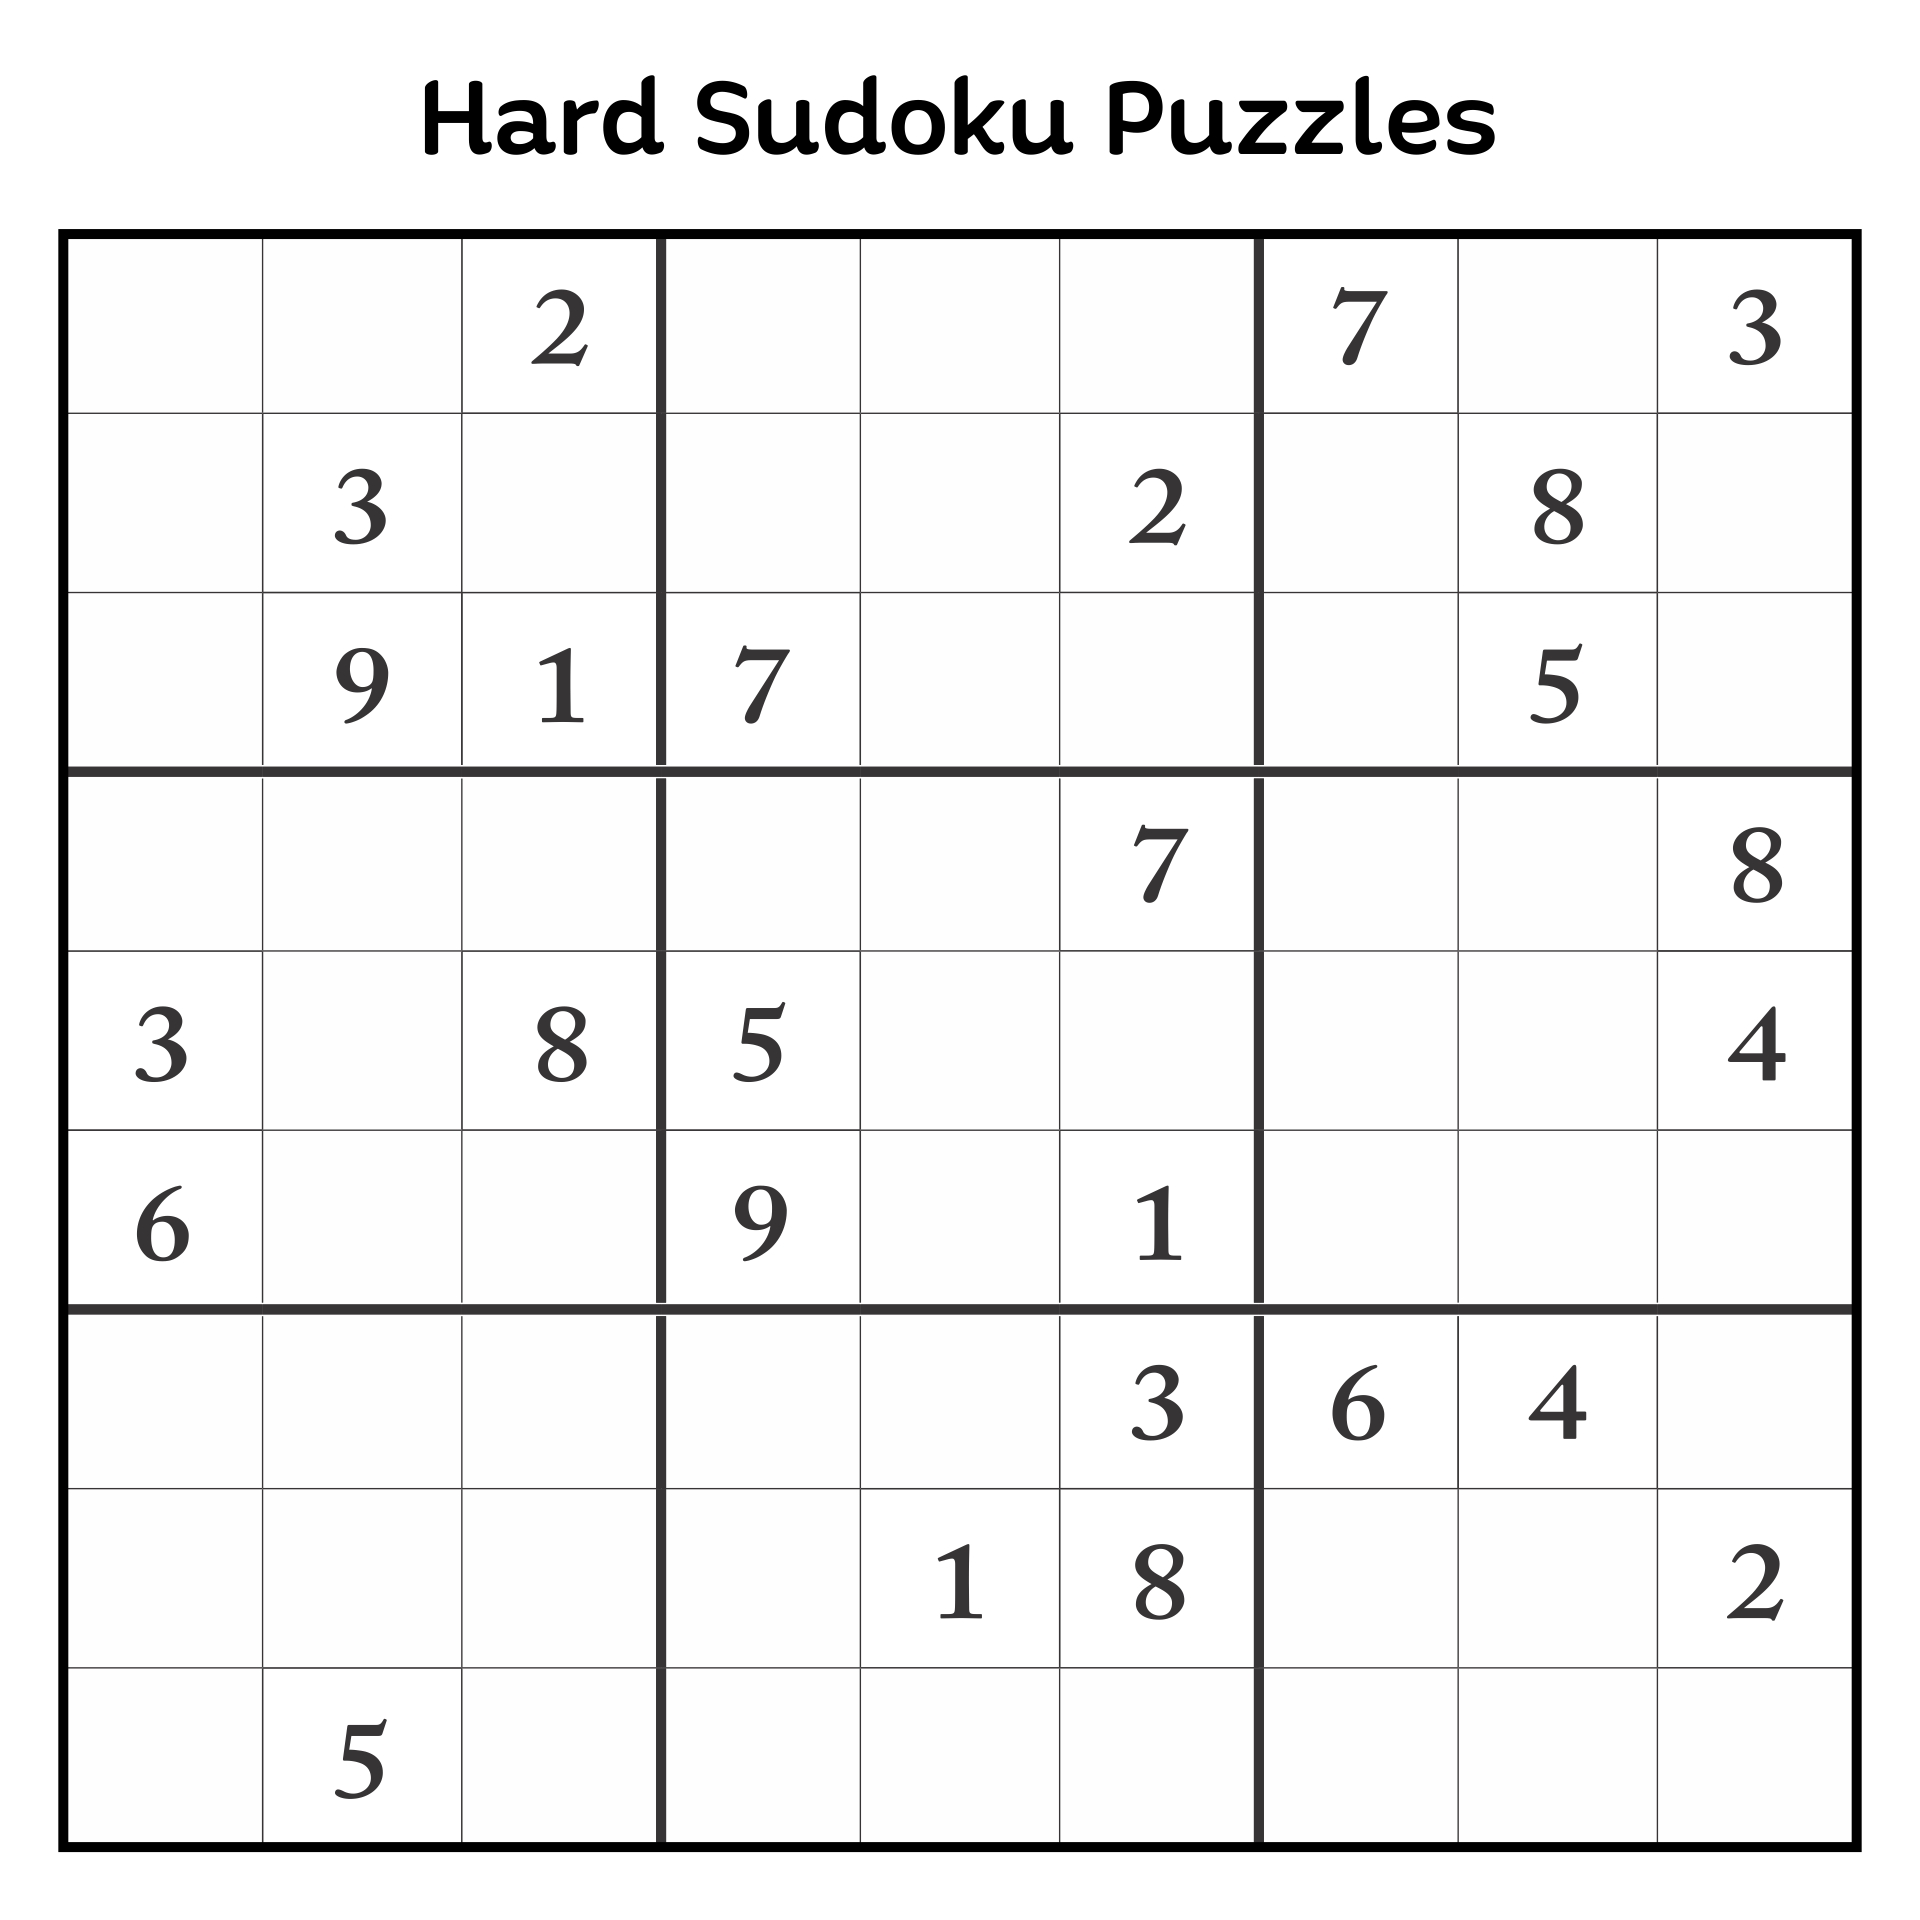 5 Best Images of Printable Sudoku Puzzles To Print Printable Sudoku Puzzles, Printable Hard